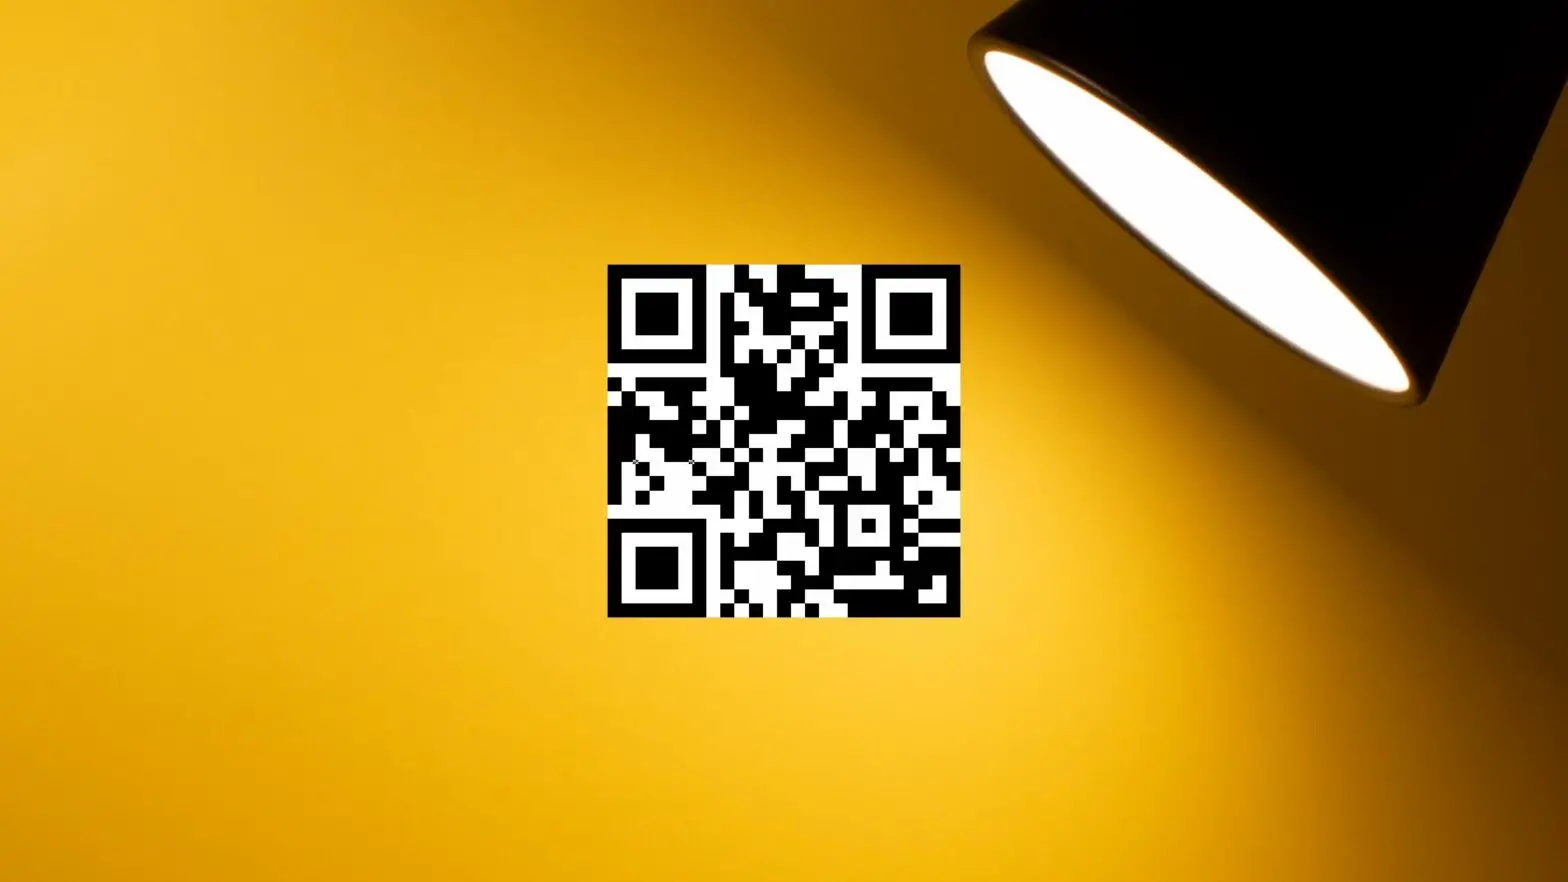 how to make a qr code for a canva presentation